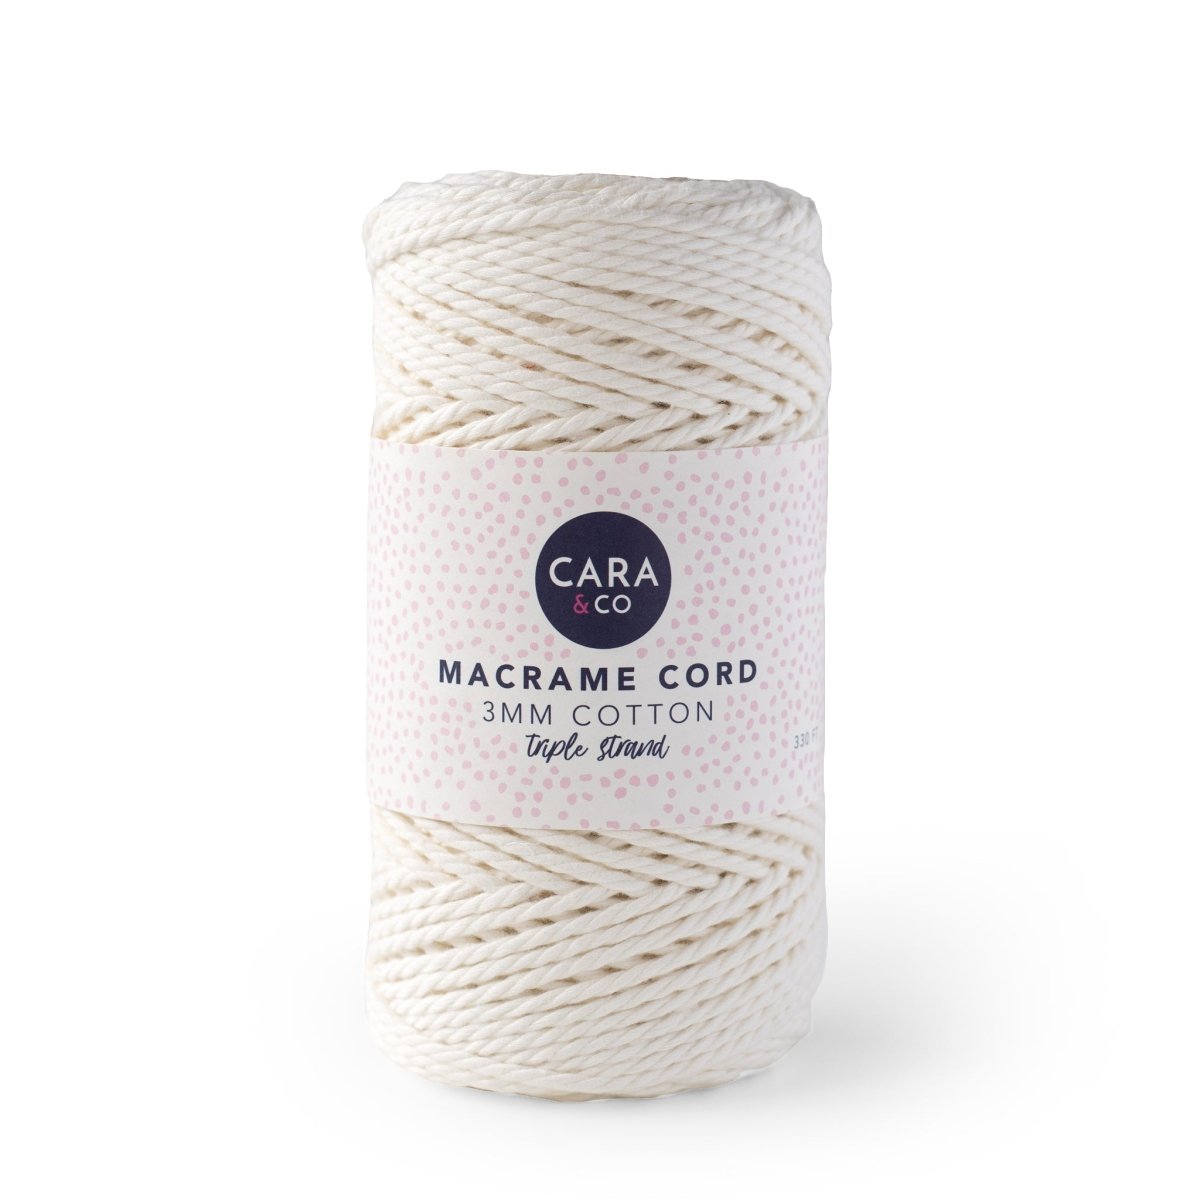 Cording Macrame Spools White Linen from Cara & Co Craft Supply